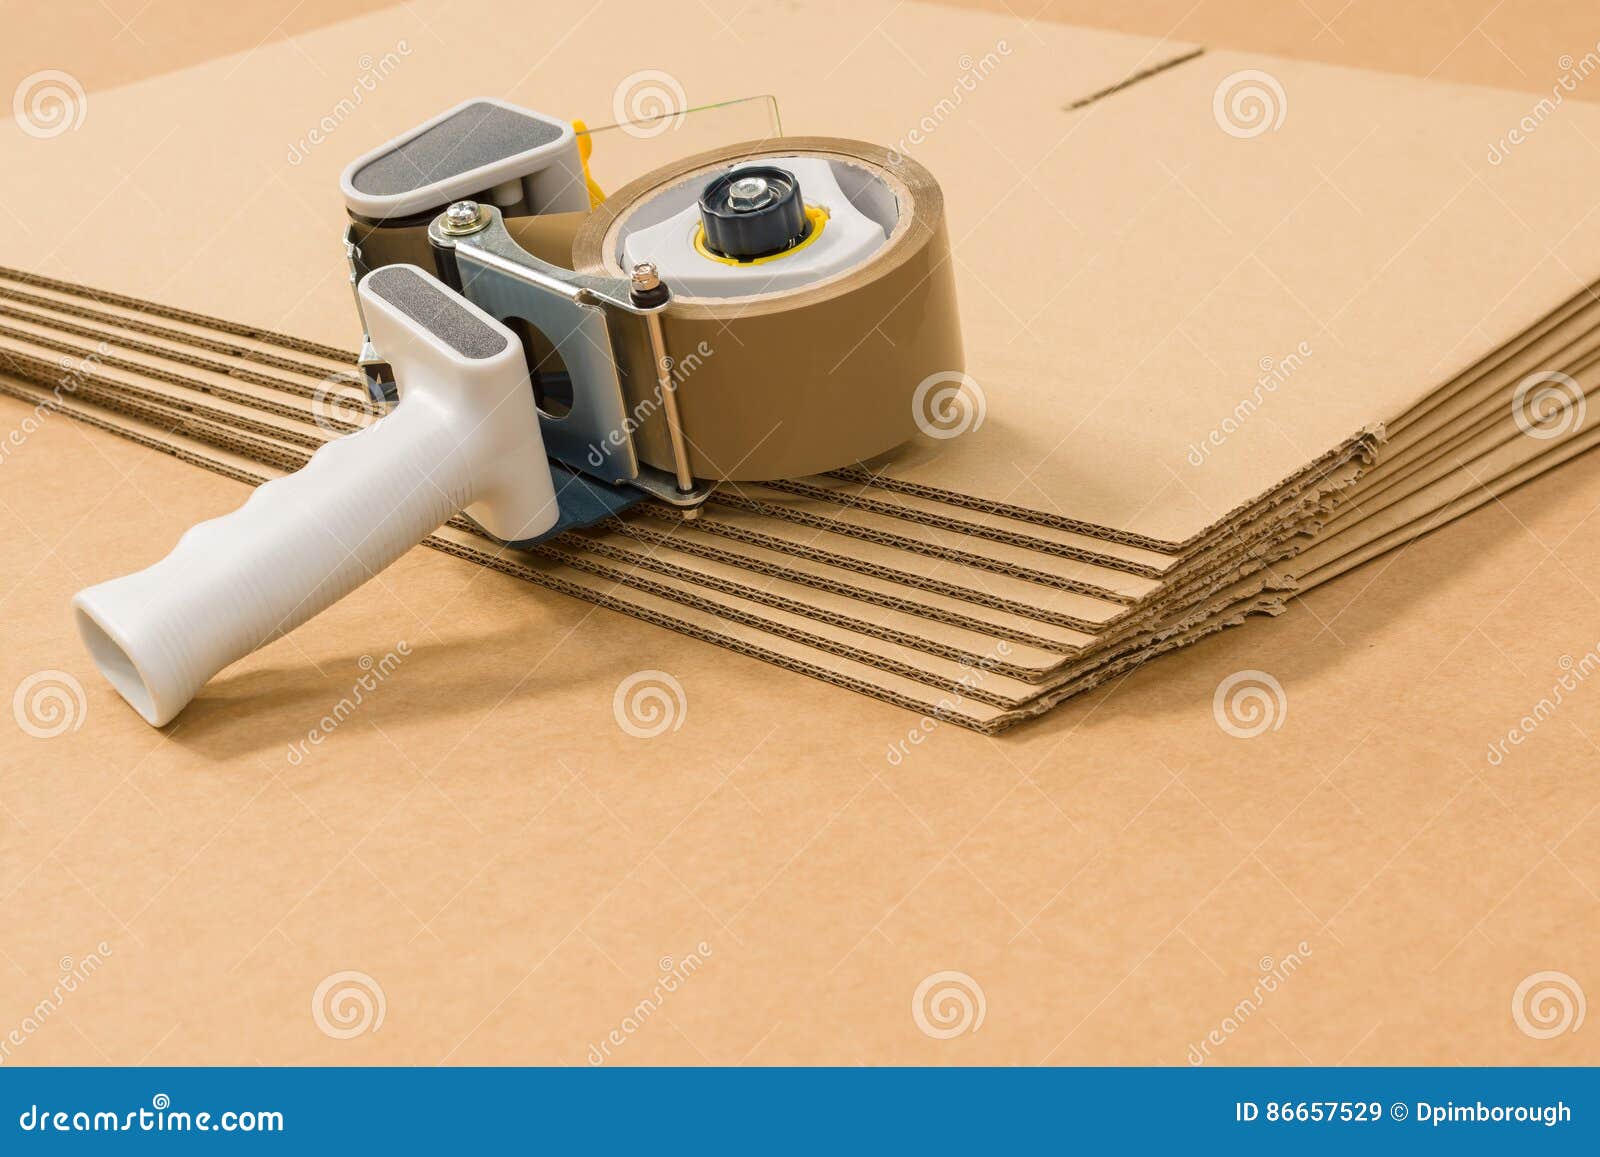 Cardboard Boxes Stock Image Image Of Paper Material 86657529